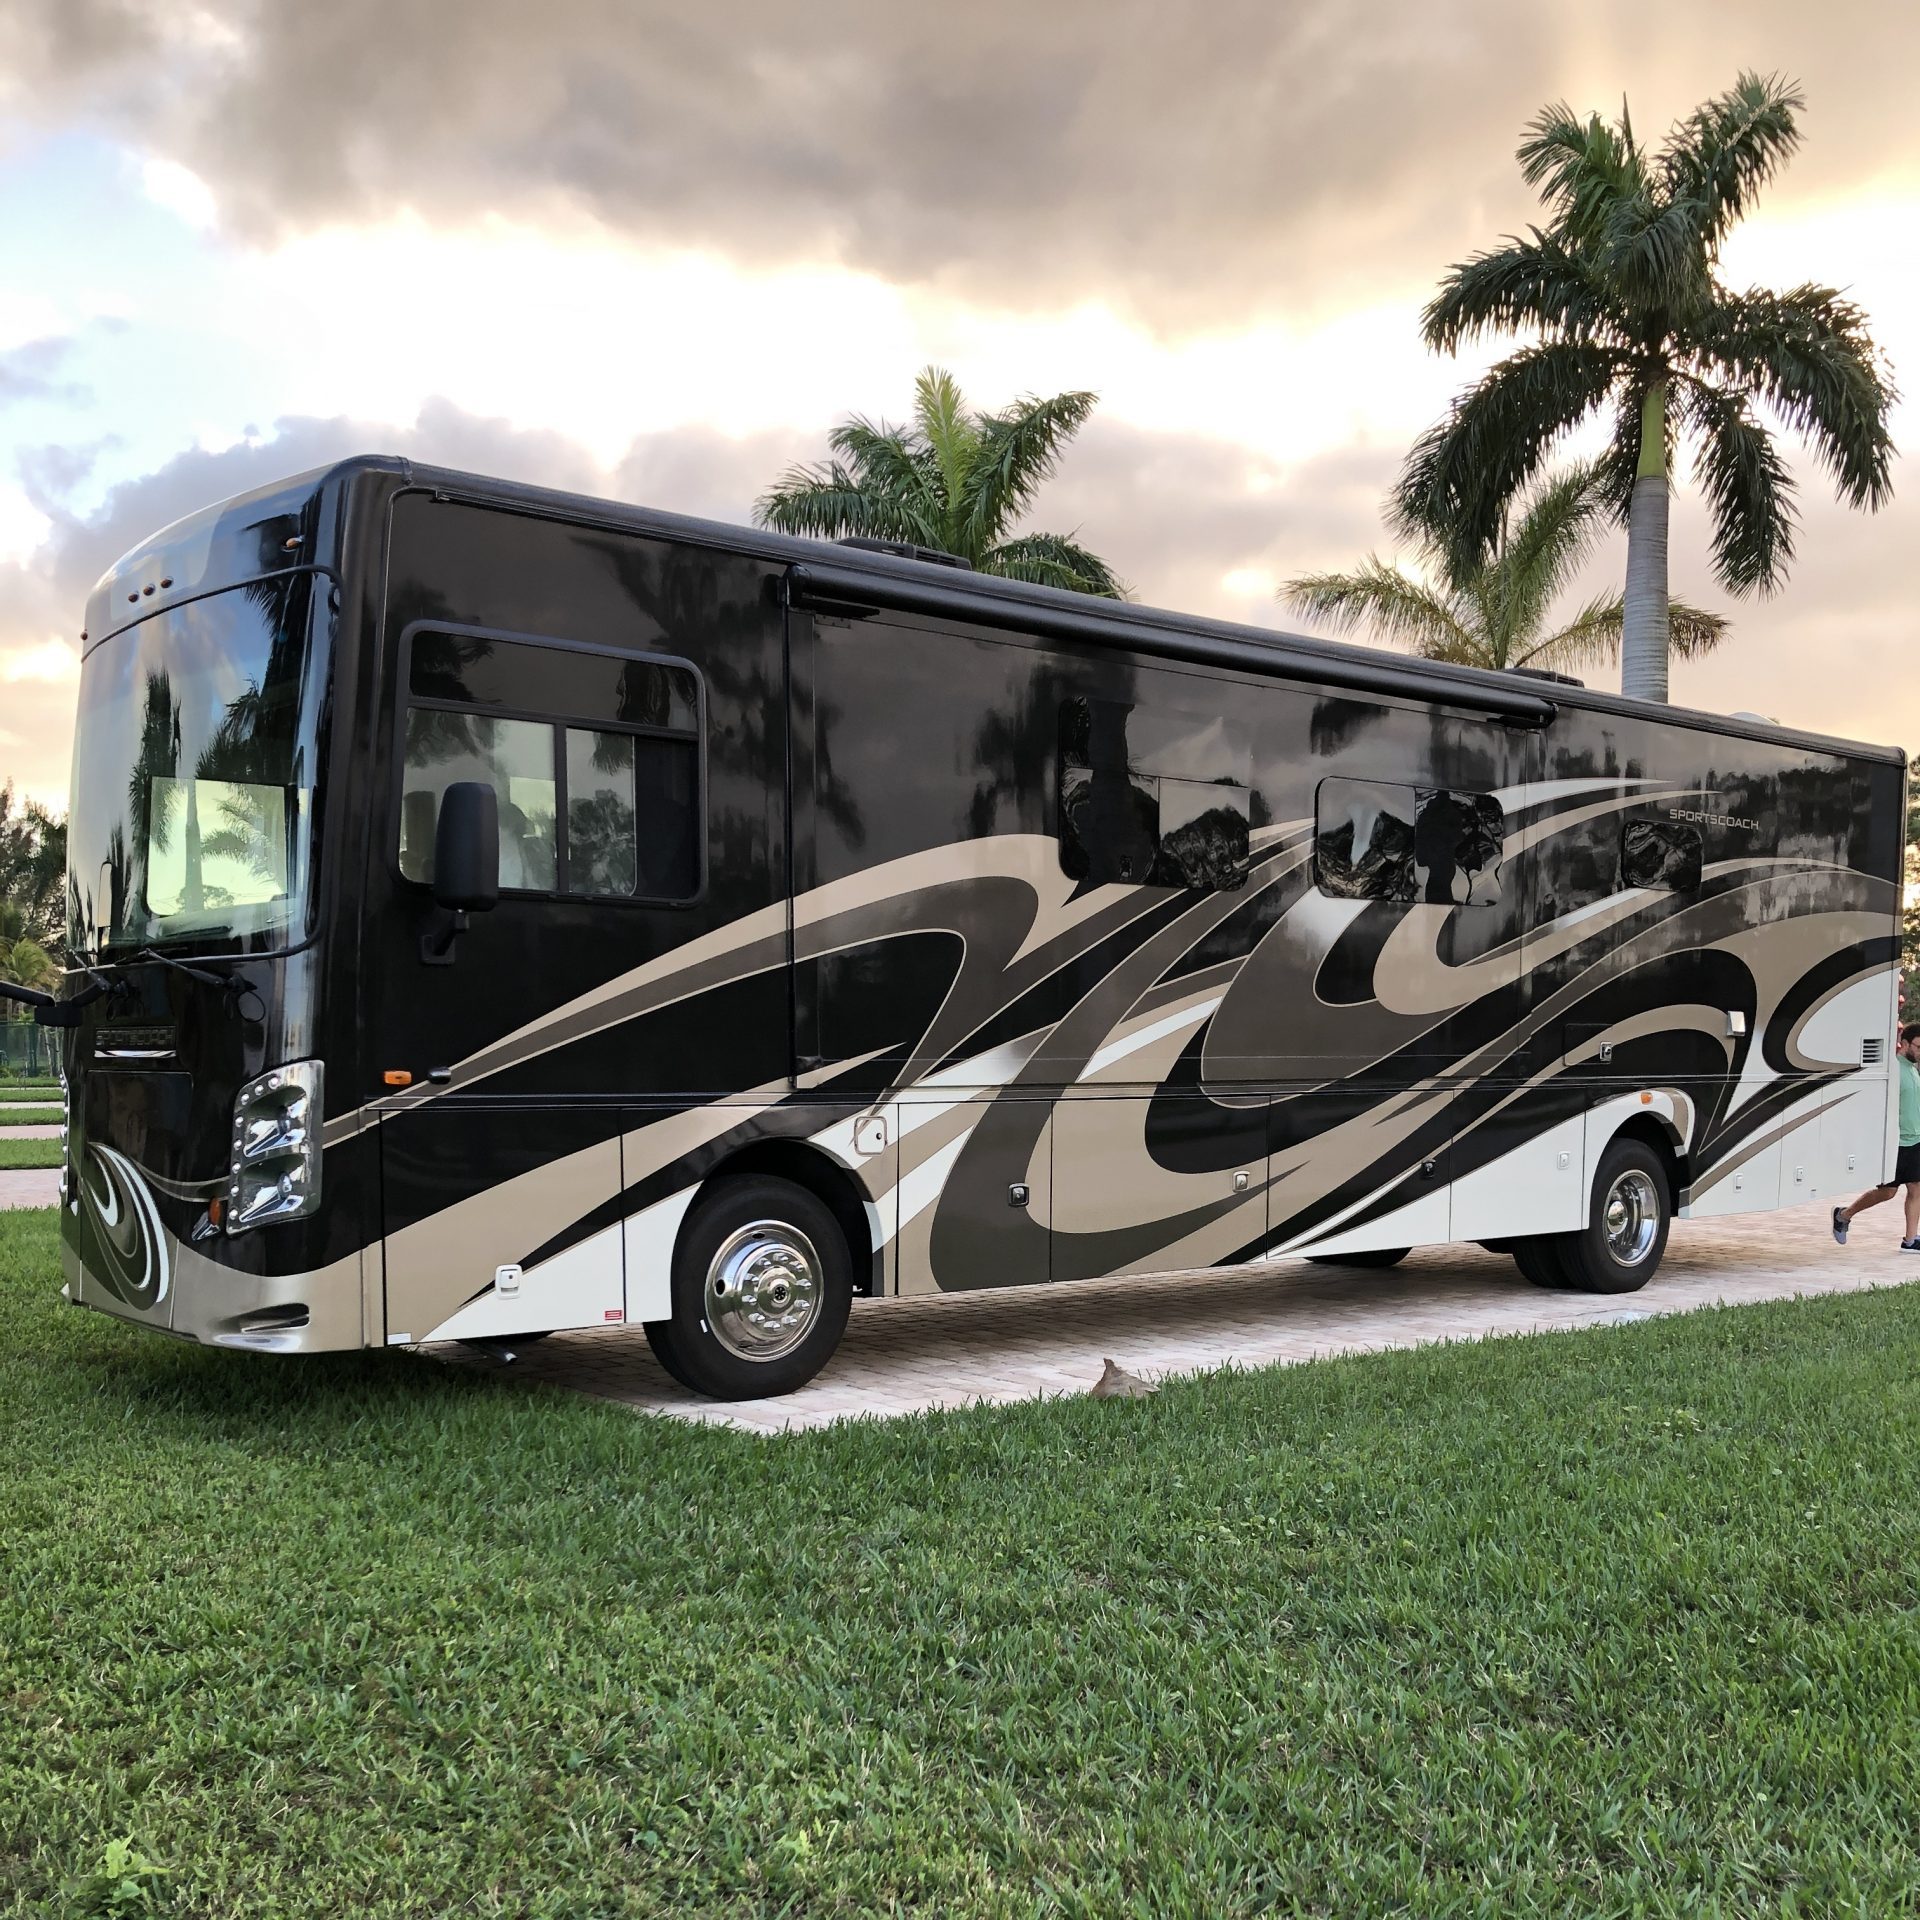 Silent Auction #516: One-Week Road Trip in a Luxury RV